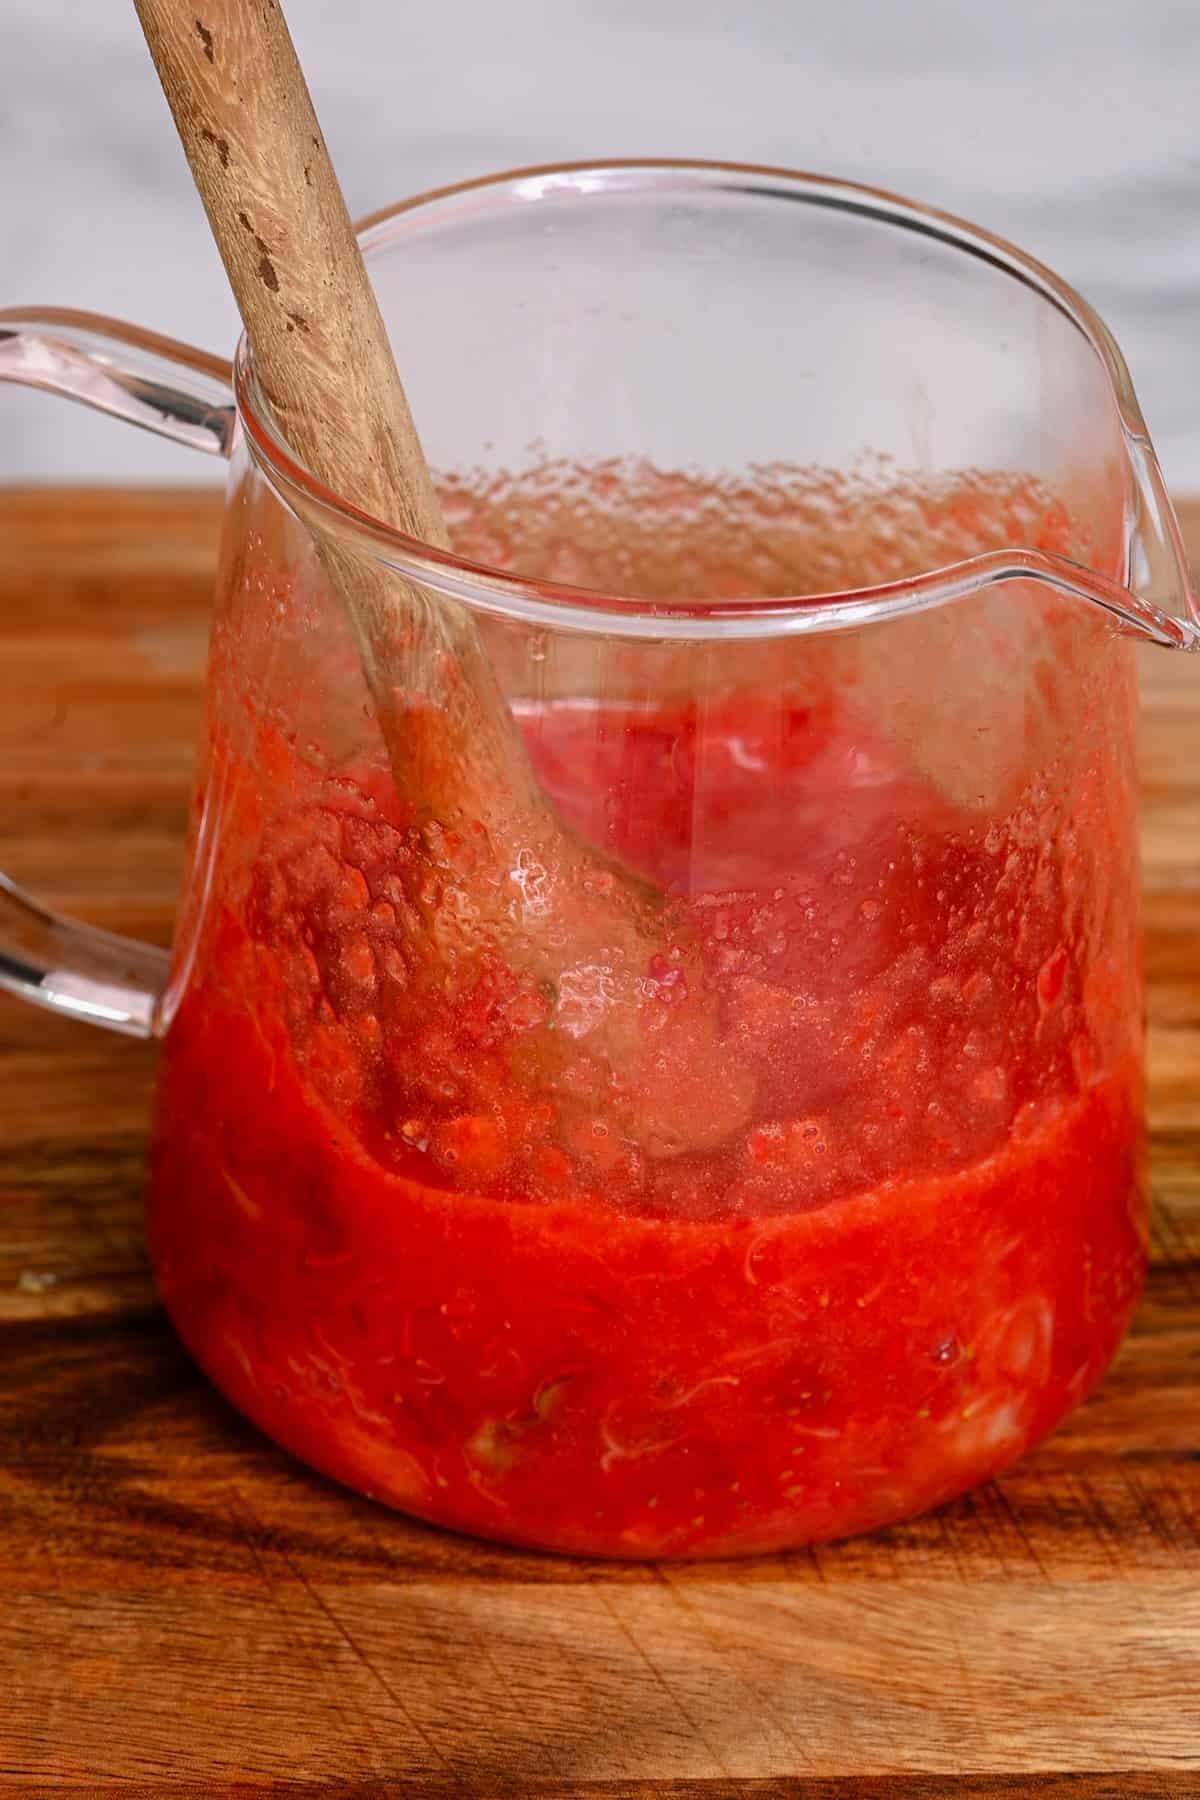 Strawberries muddled in a small glass container